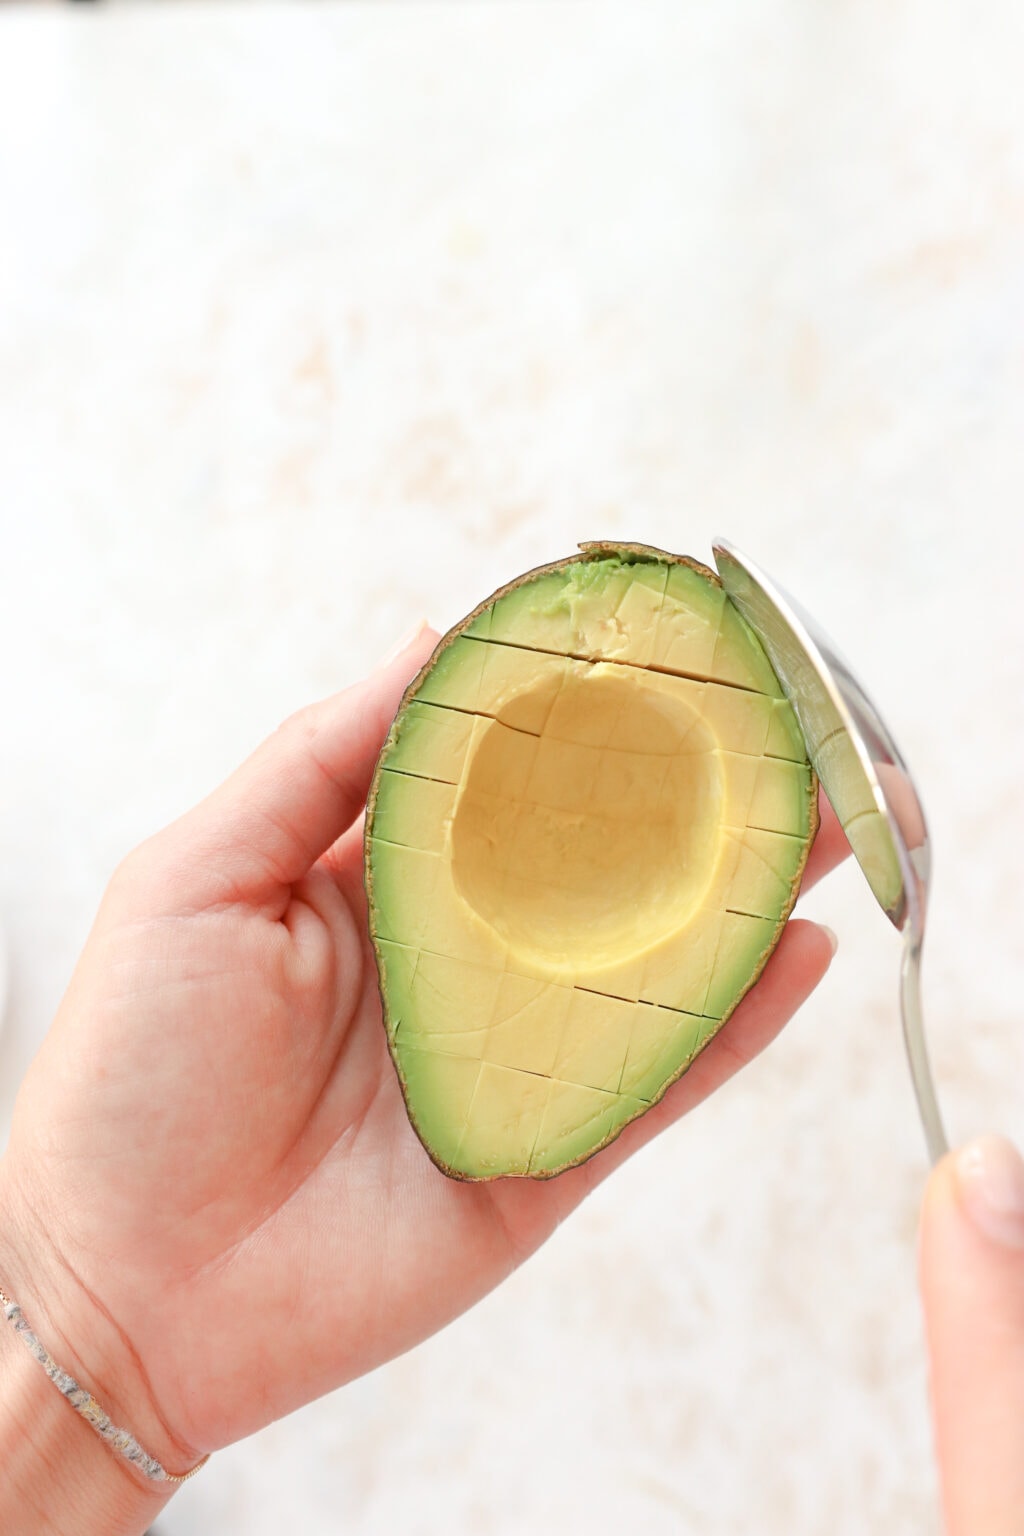 A hand is holding a scored avocado with the skin on and is using a silver spoon to scoop out the rest of the avocado. 